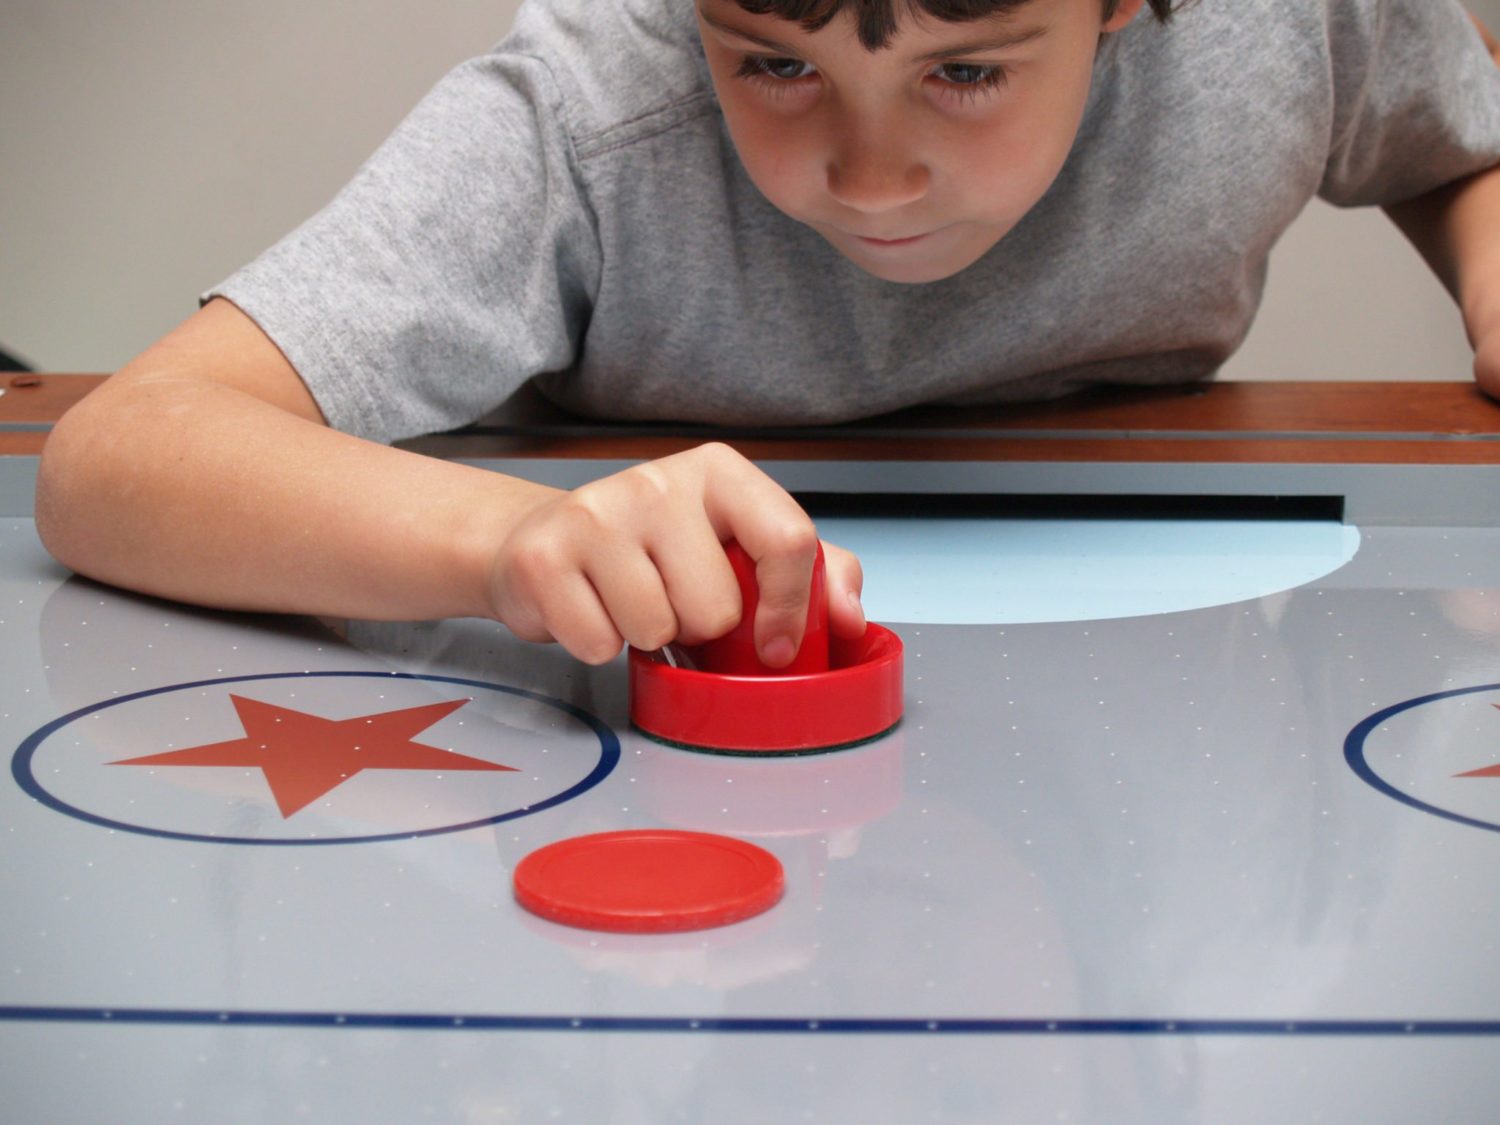 Remember the classic arcade and game room game air hockey? Learn how to play air hockey and the air hockey rules at www.GameOnFamily.com. Game on!